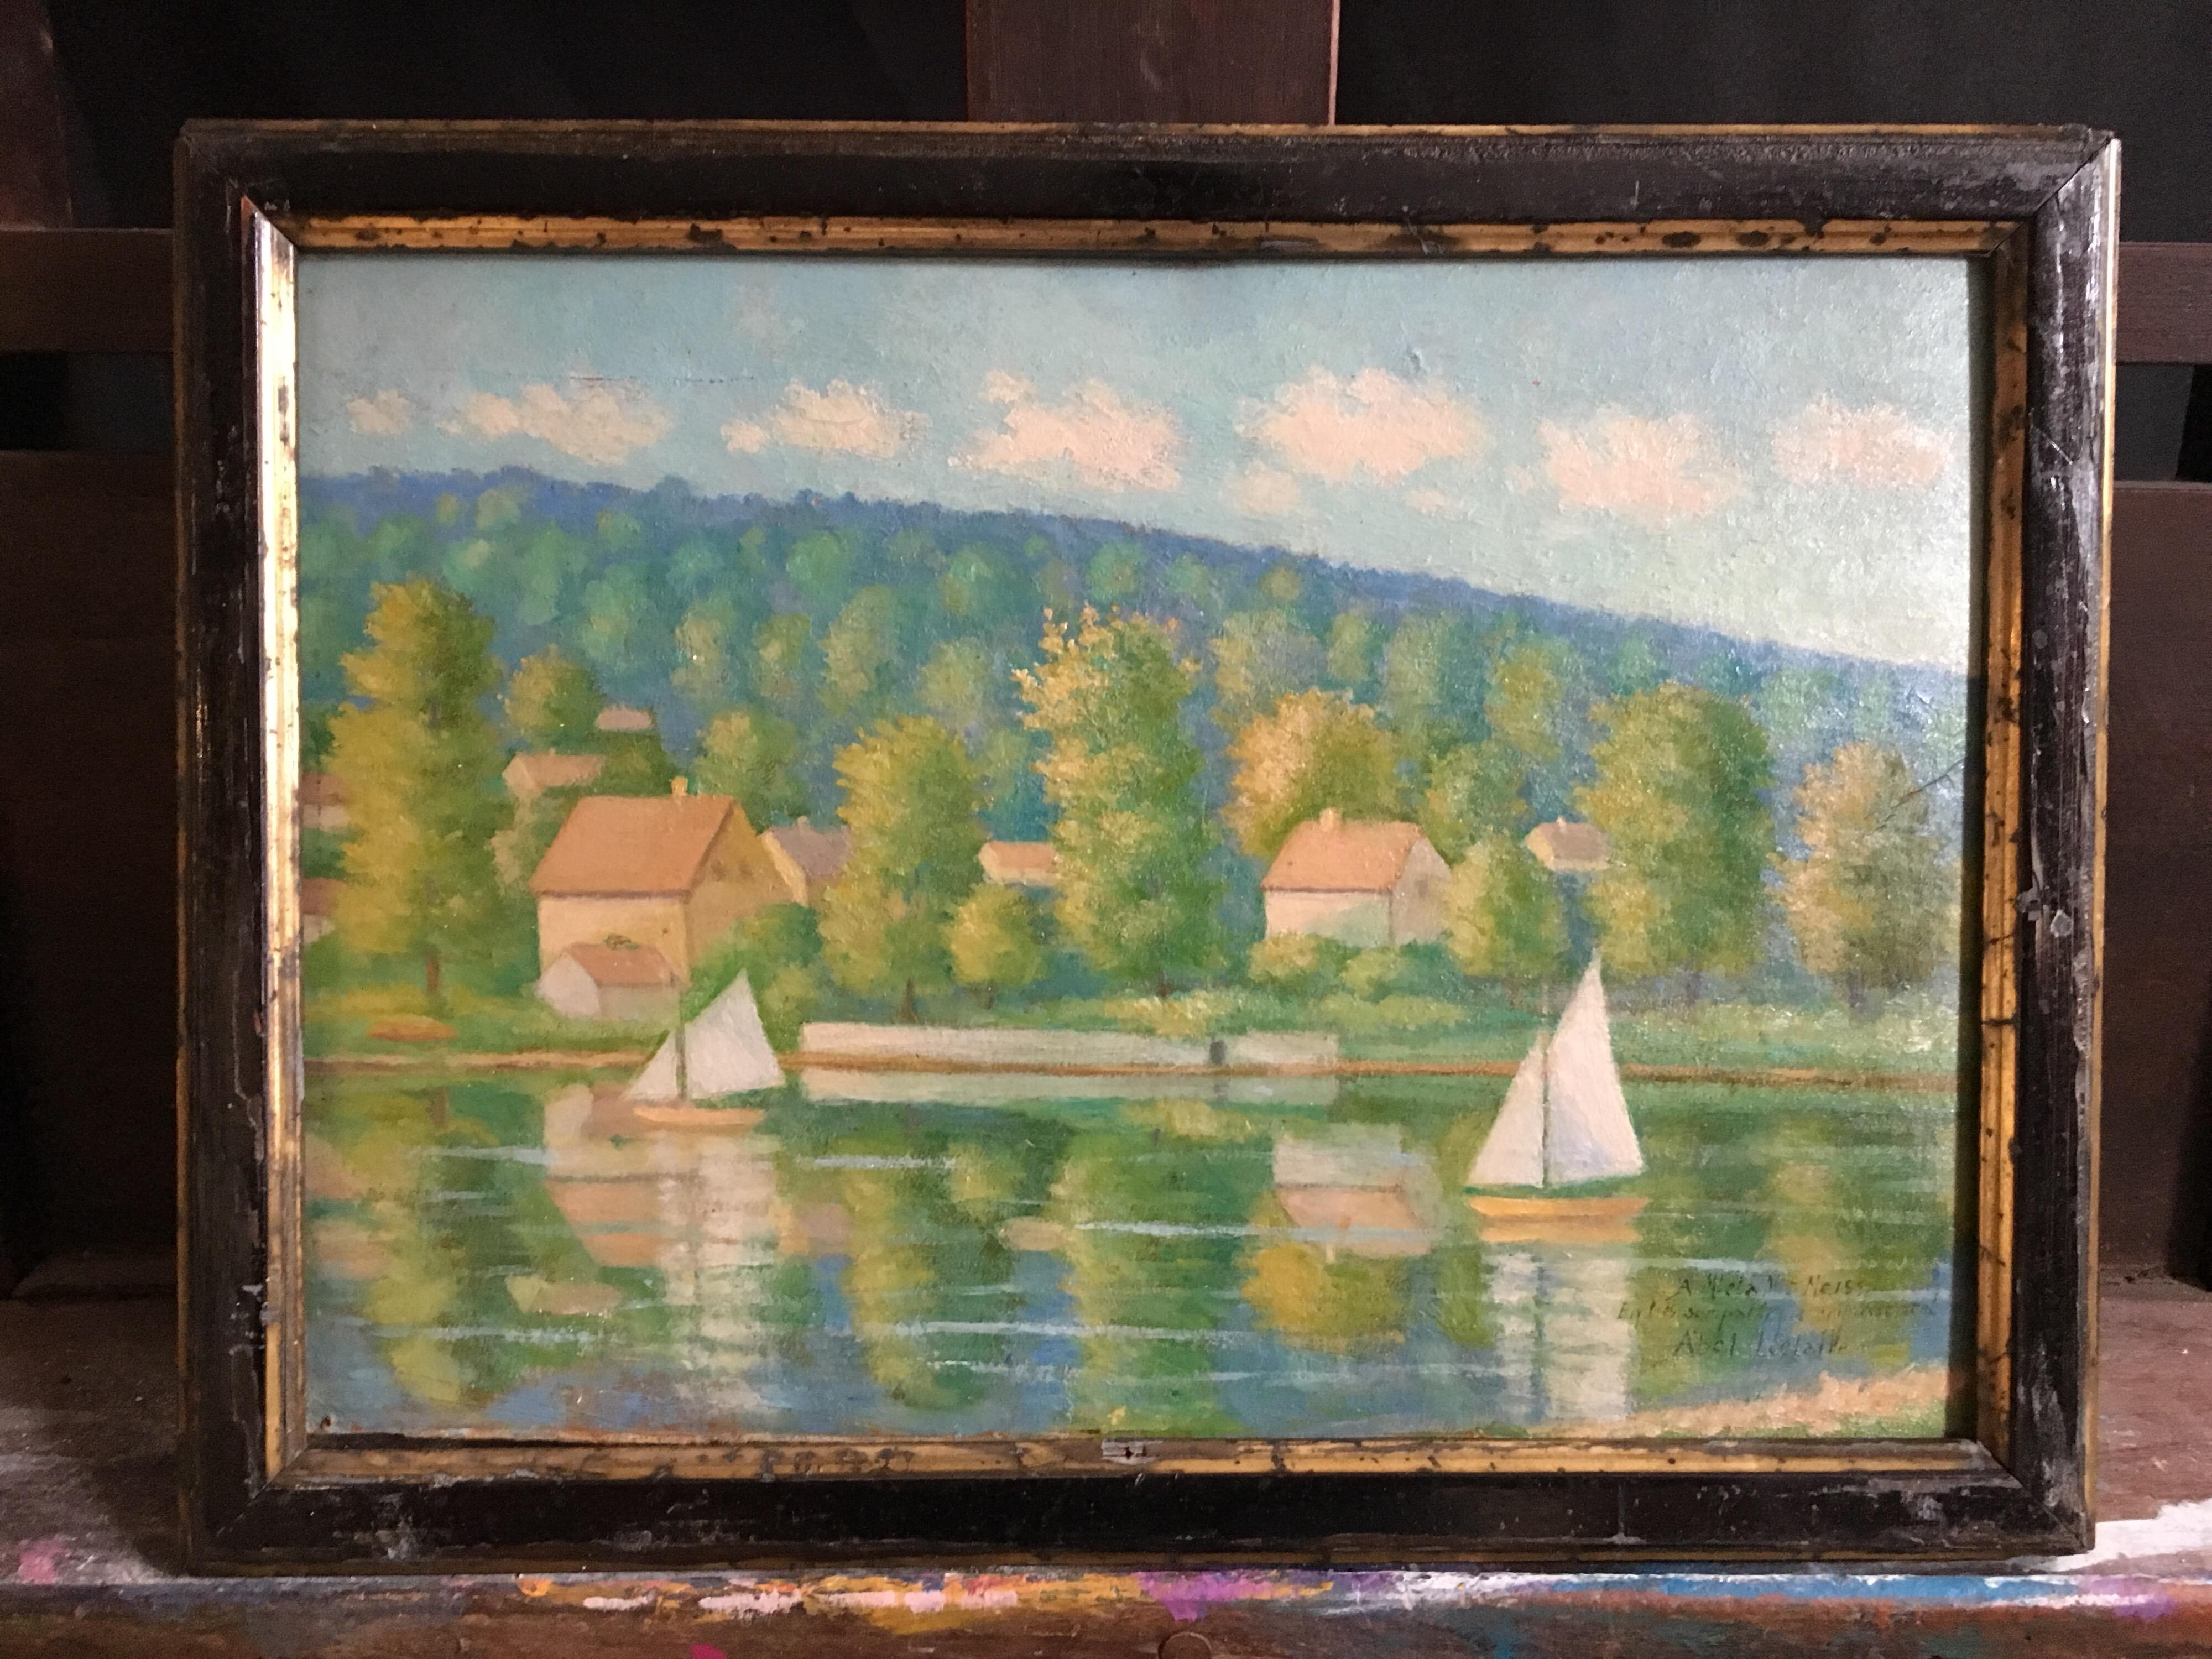 Landscape of a French Lake, Signed Oil Painting 
By French artist, Abel LeBalle, Mid 20th Century
Signed and titled by the artist on the lower right hand corner, however it's indecipherable
Oil painting on board, framed
Frame size: 11 x 14.5